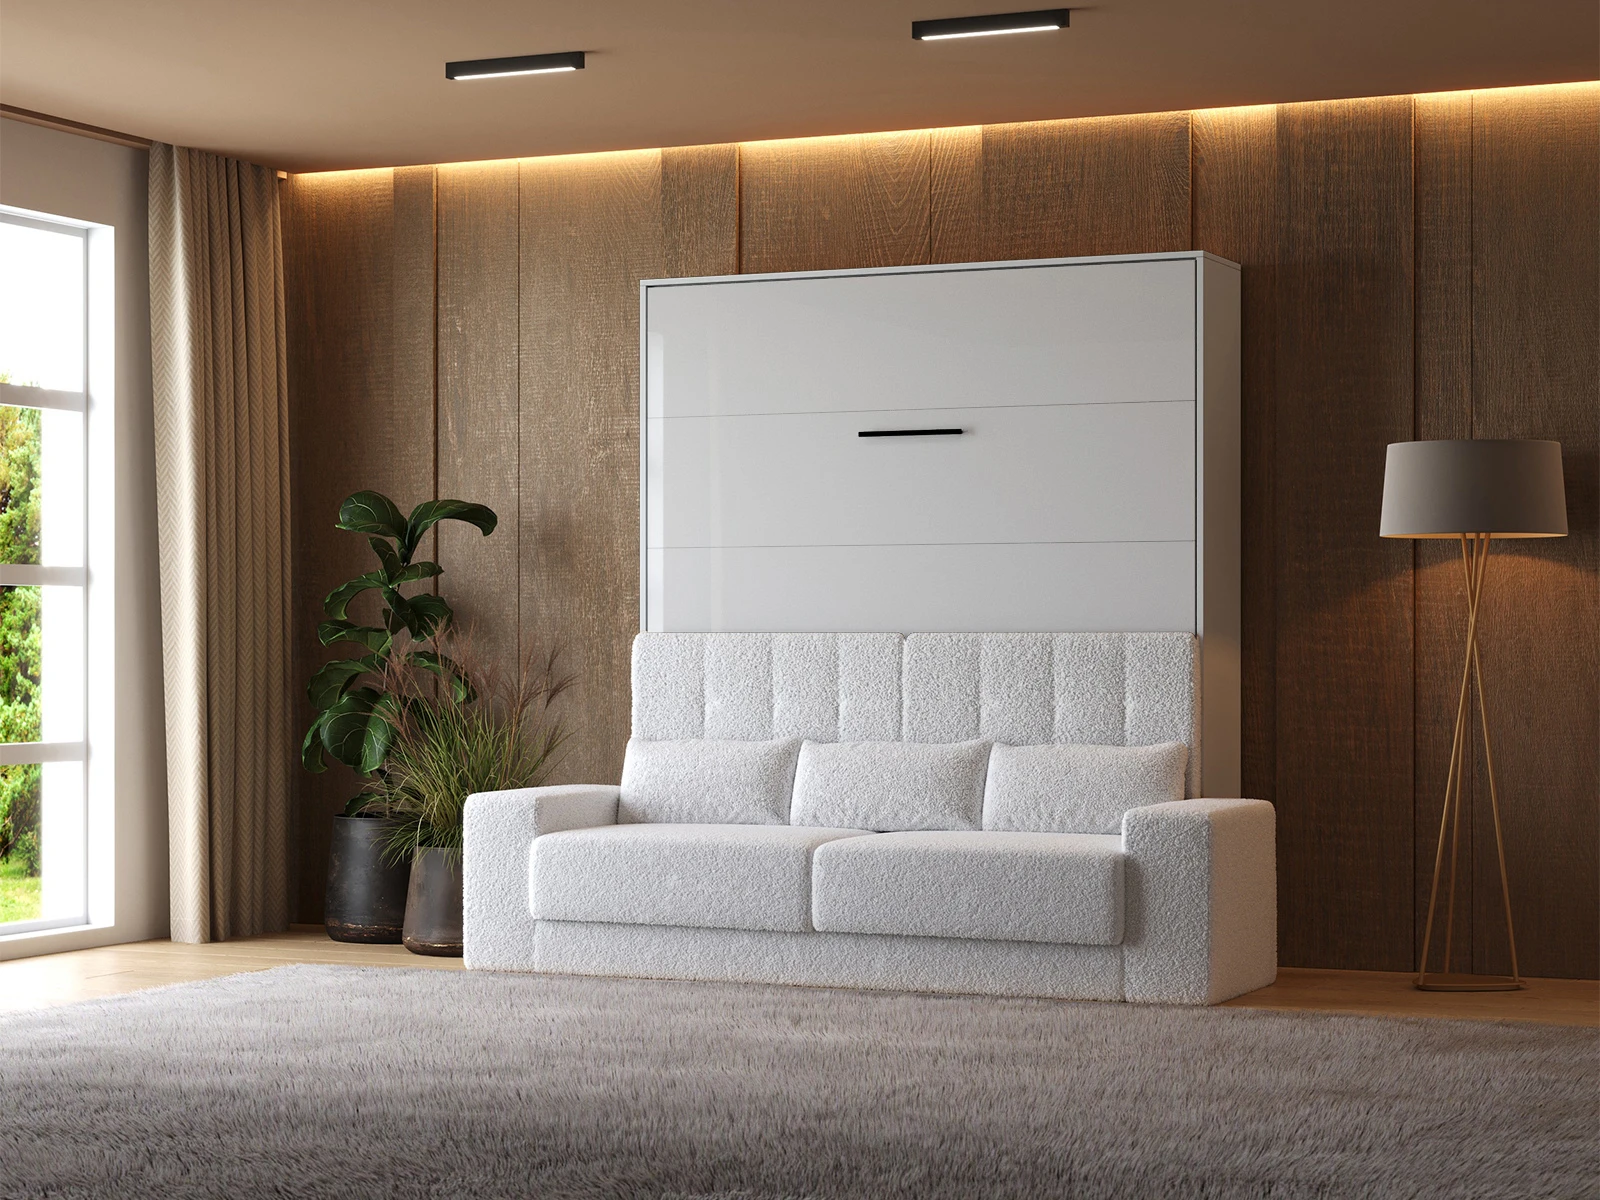 1 Murphy Bed (M1) 180x200 Vertical White / White Gloss with Sofa White